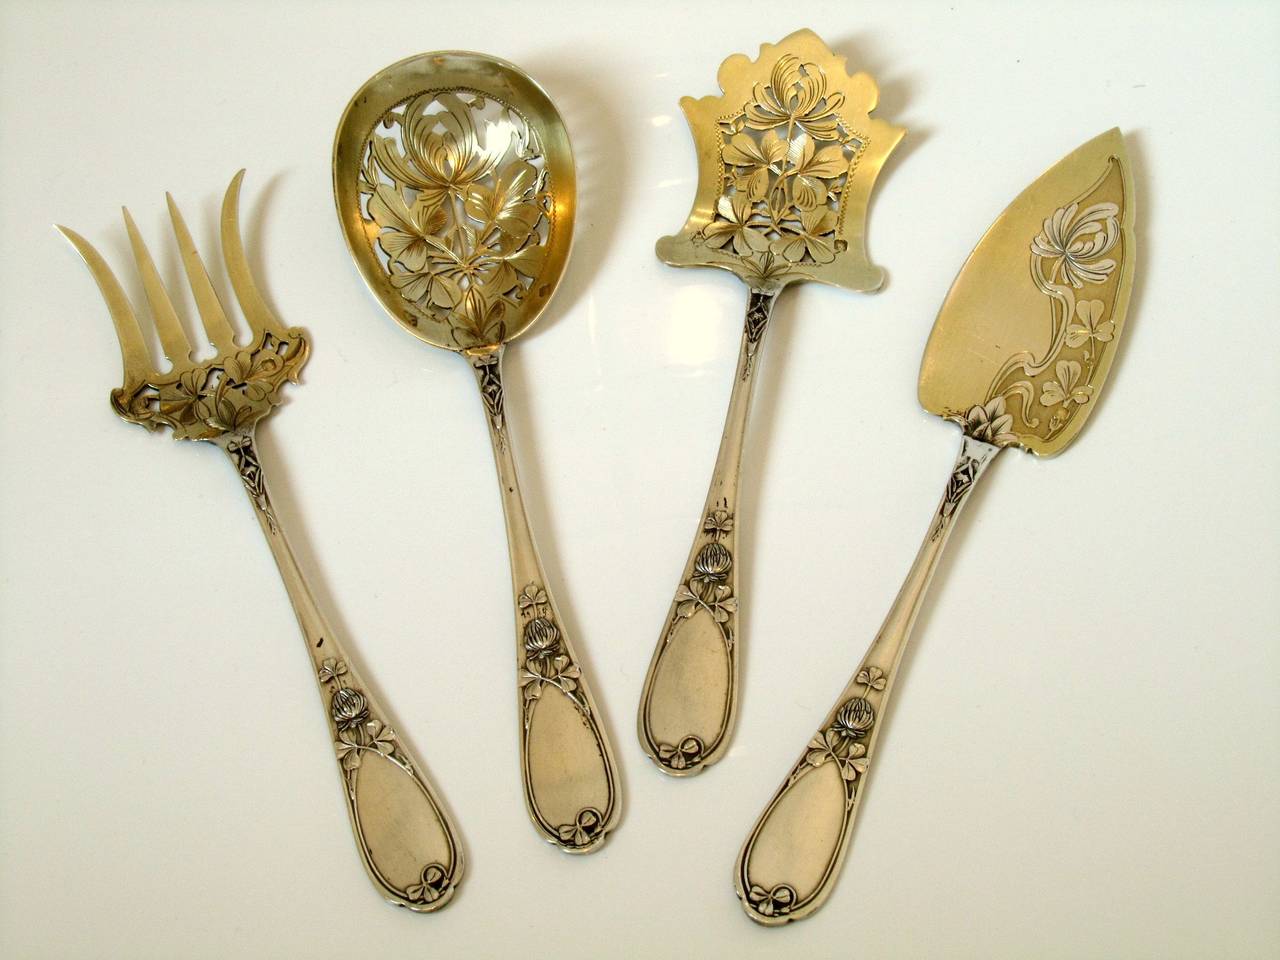 Ernie Rare French All Sterling Silver Vermeil Hors D'Oeuvre Set 4 pc Box Clovers 1